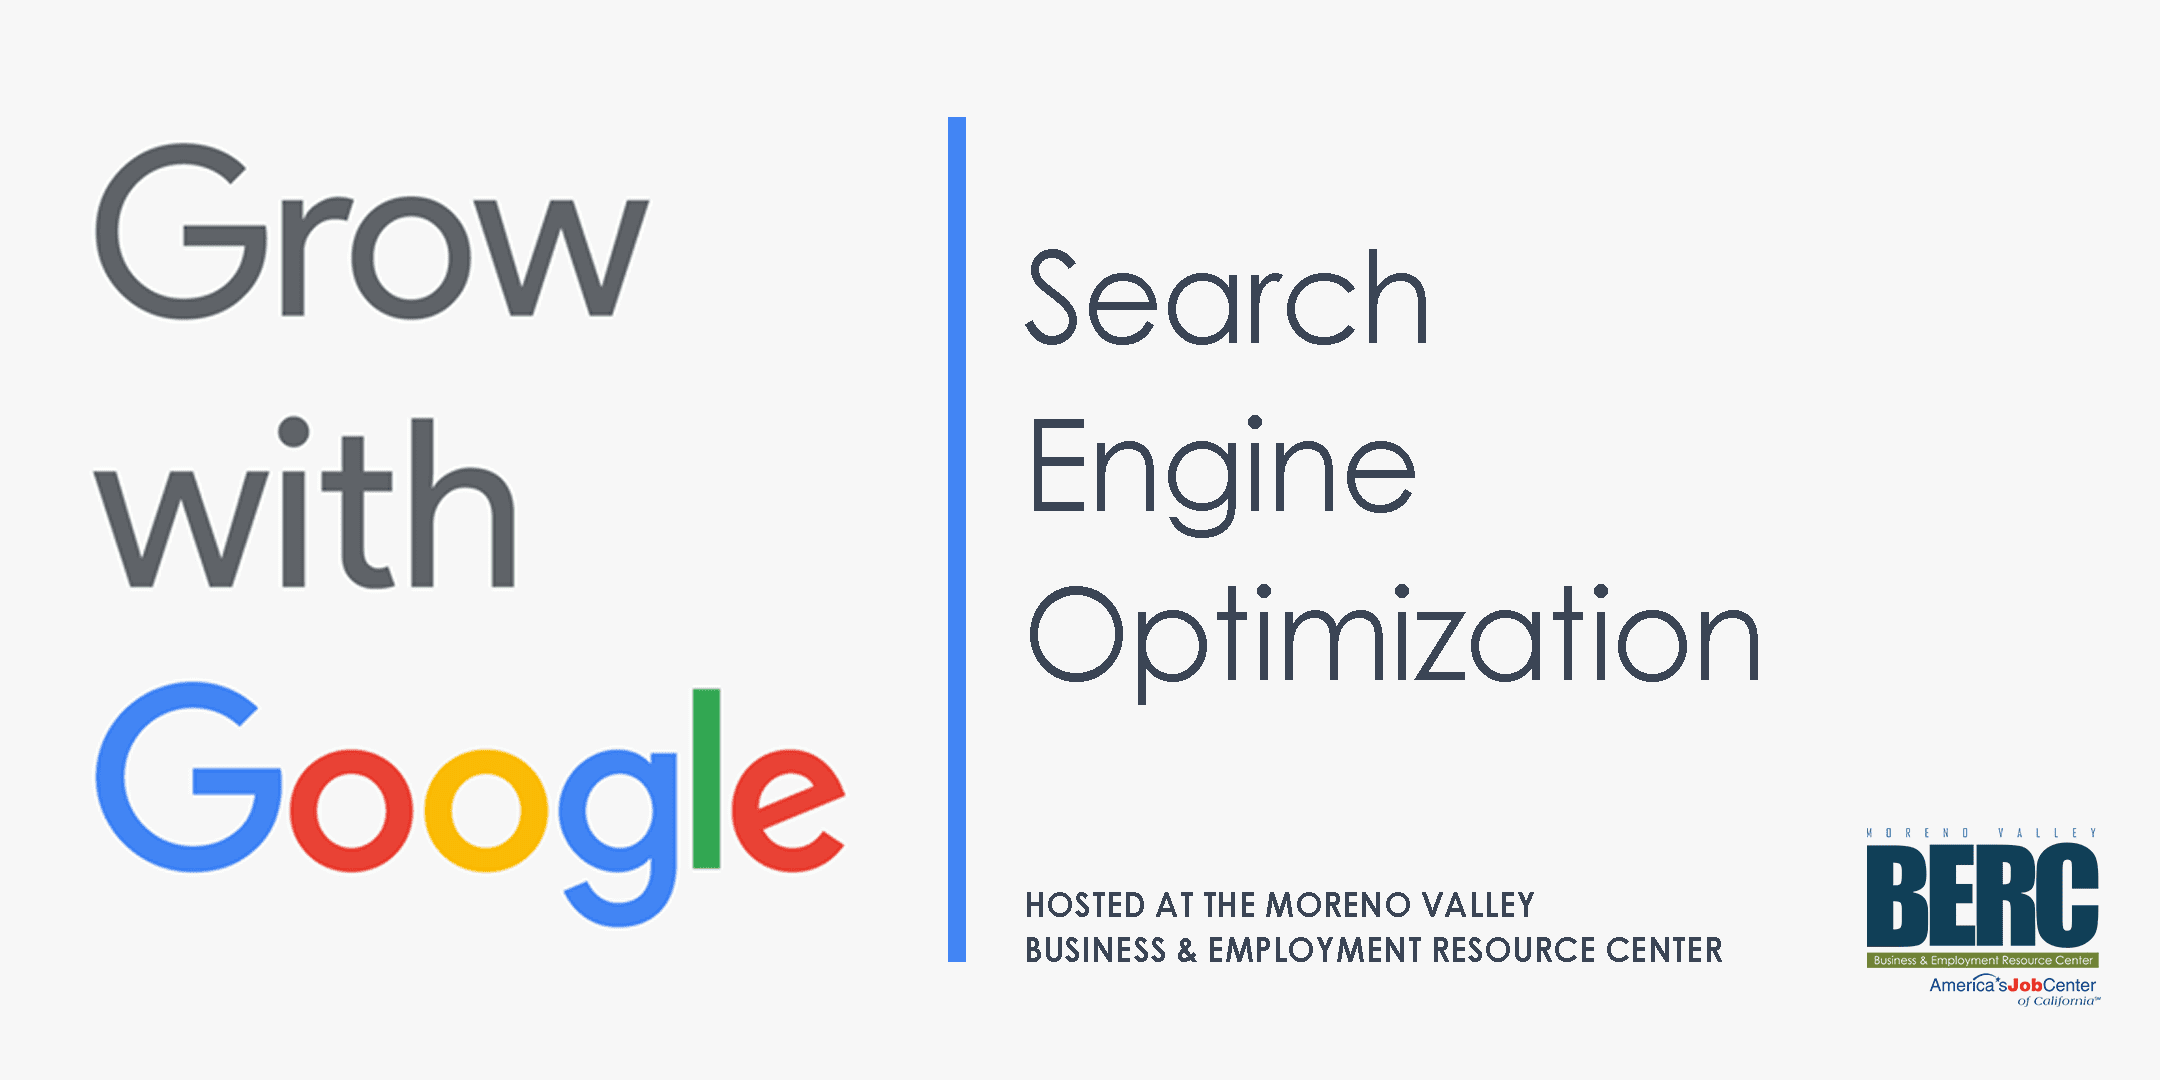 Grow with Google: Search Engine Optimization